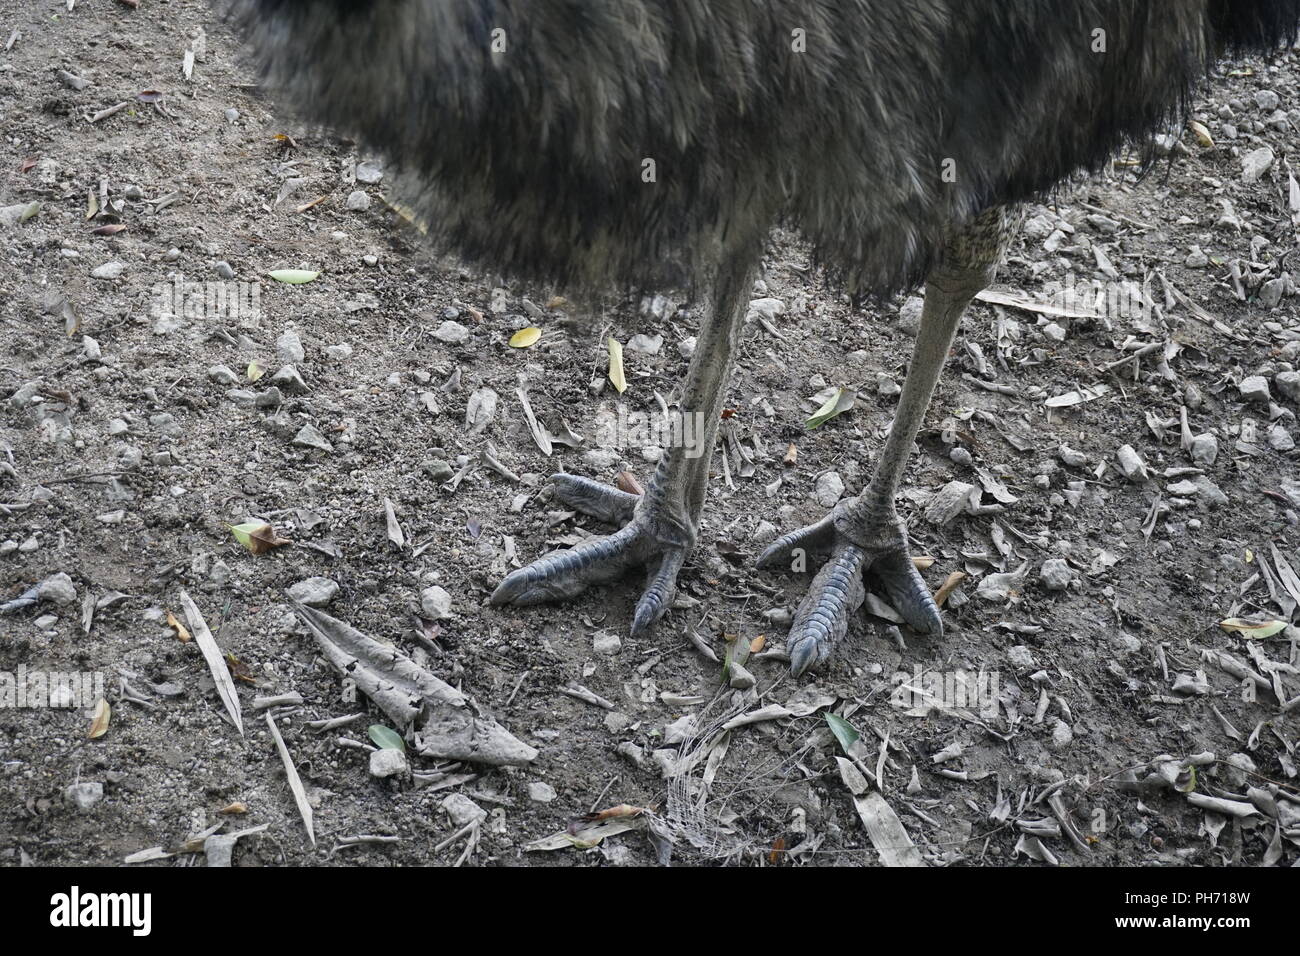 toes of emu with knife-like nails Stock Photo